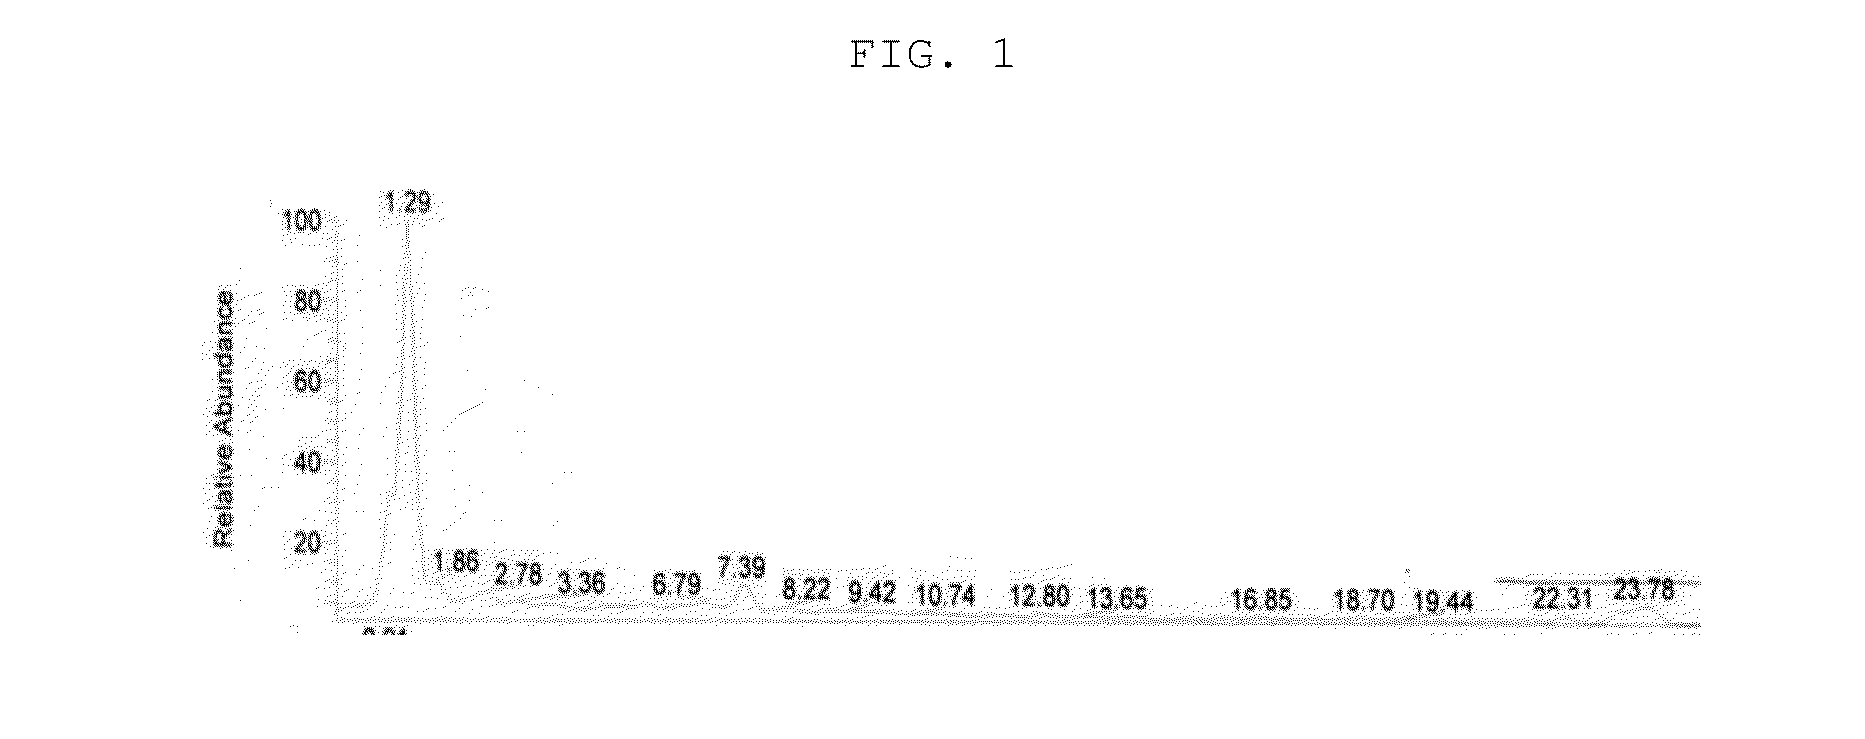 Novel compound isolated from quamoclit, and composition for preventing or treating diabetes containing the compound as an active ingredient